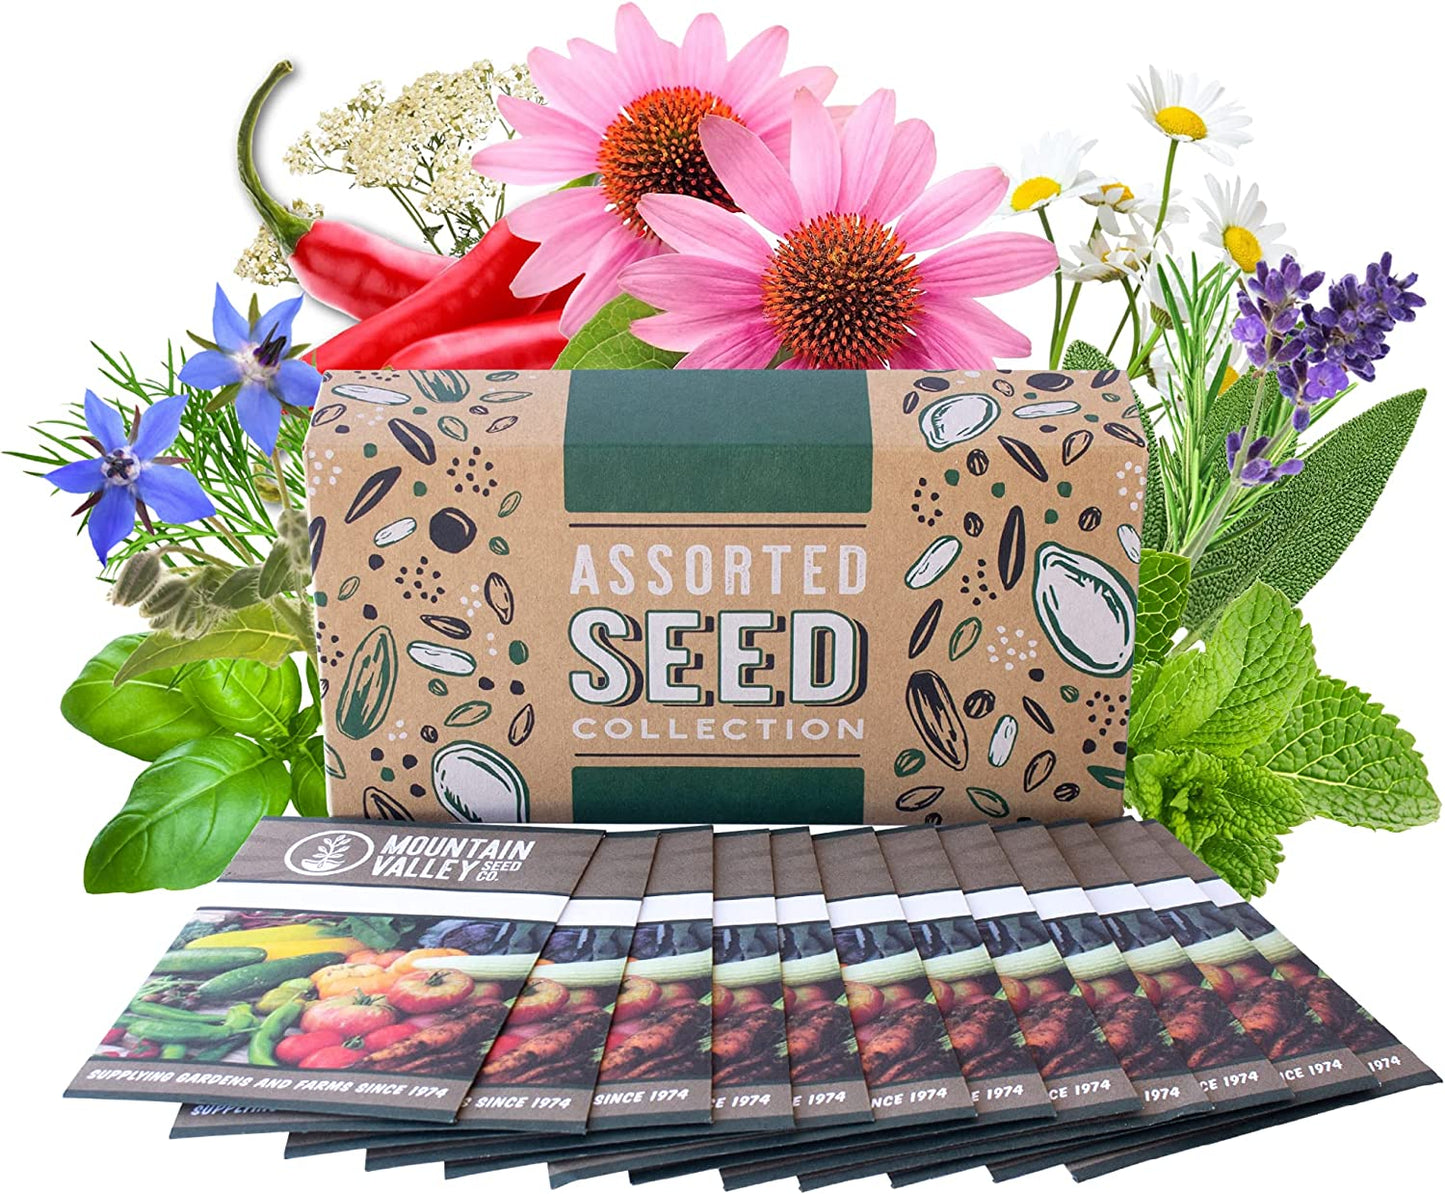 Medicinal & Herbal Tea Garden Seed Collection - Deluxe Assortment - 12 Non-Gmo Herb Seed Packets: Sage, Rosemary, Chamomile, Lavender, Peppermint, & More